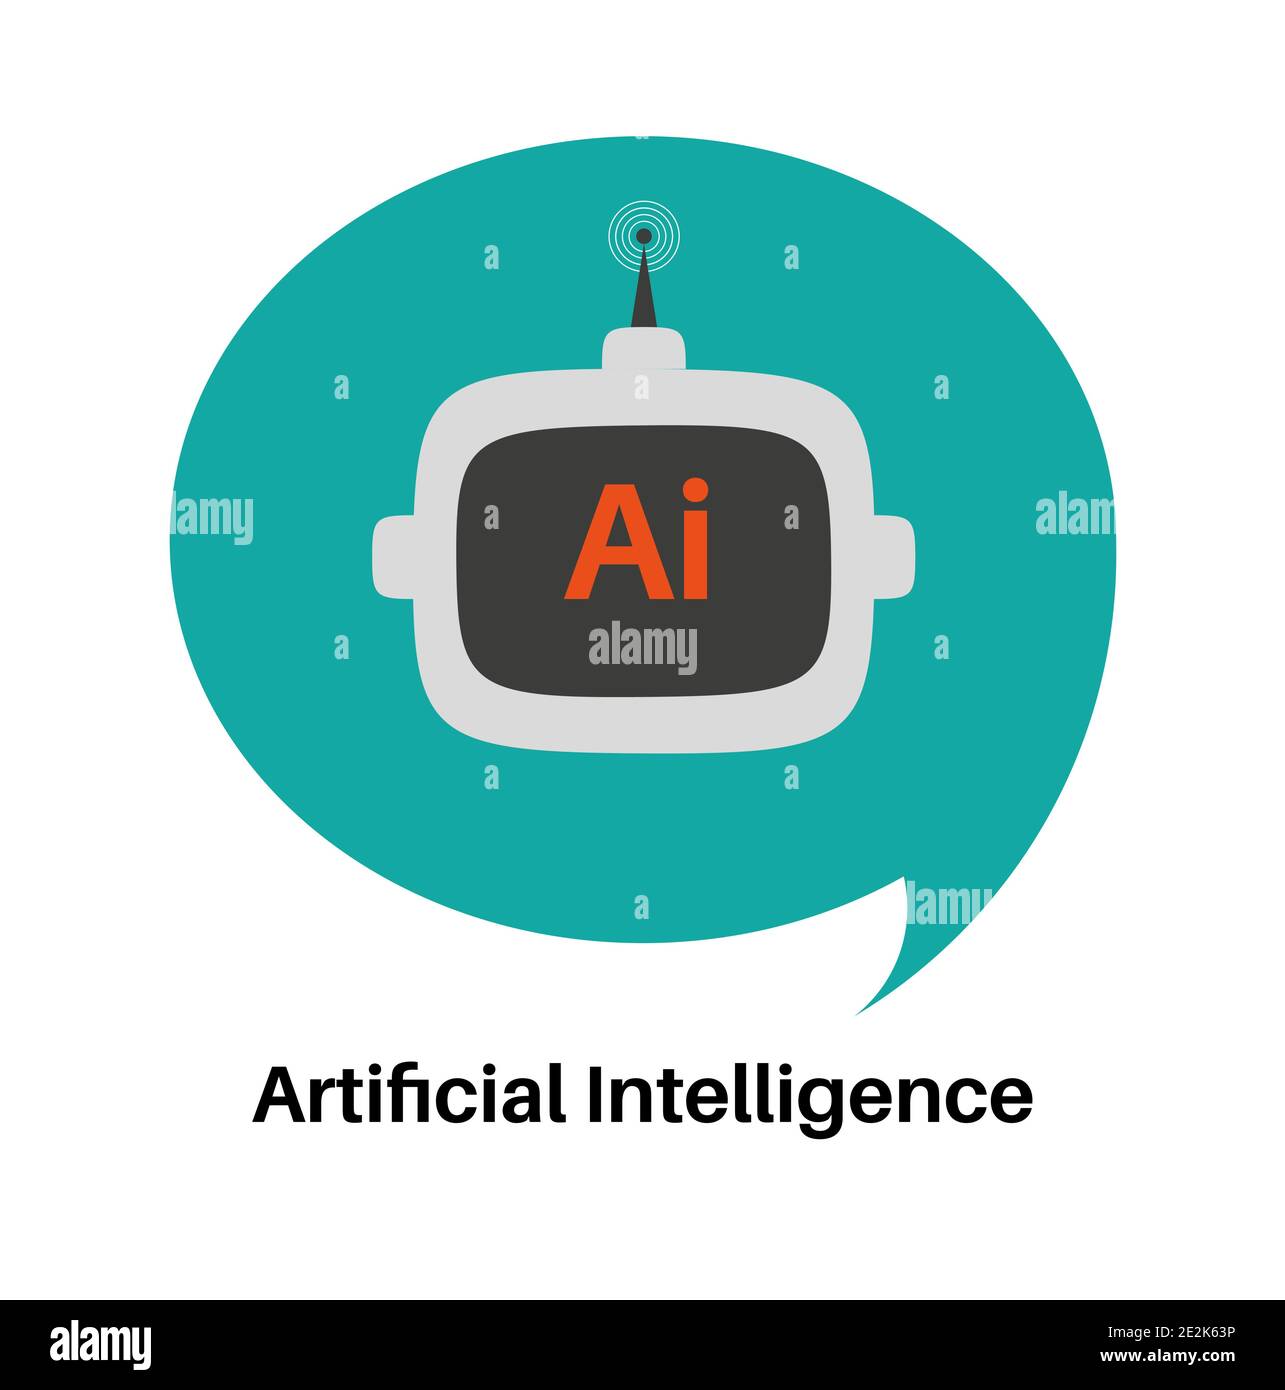 Intelligence for chat artificial 20 Best